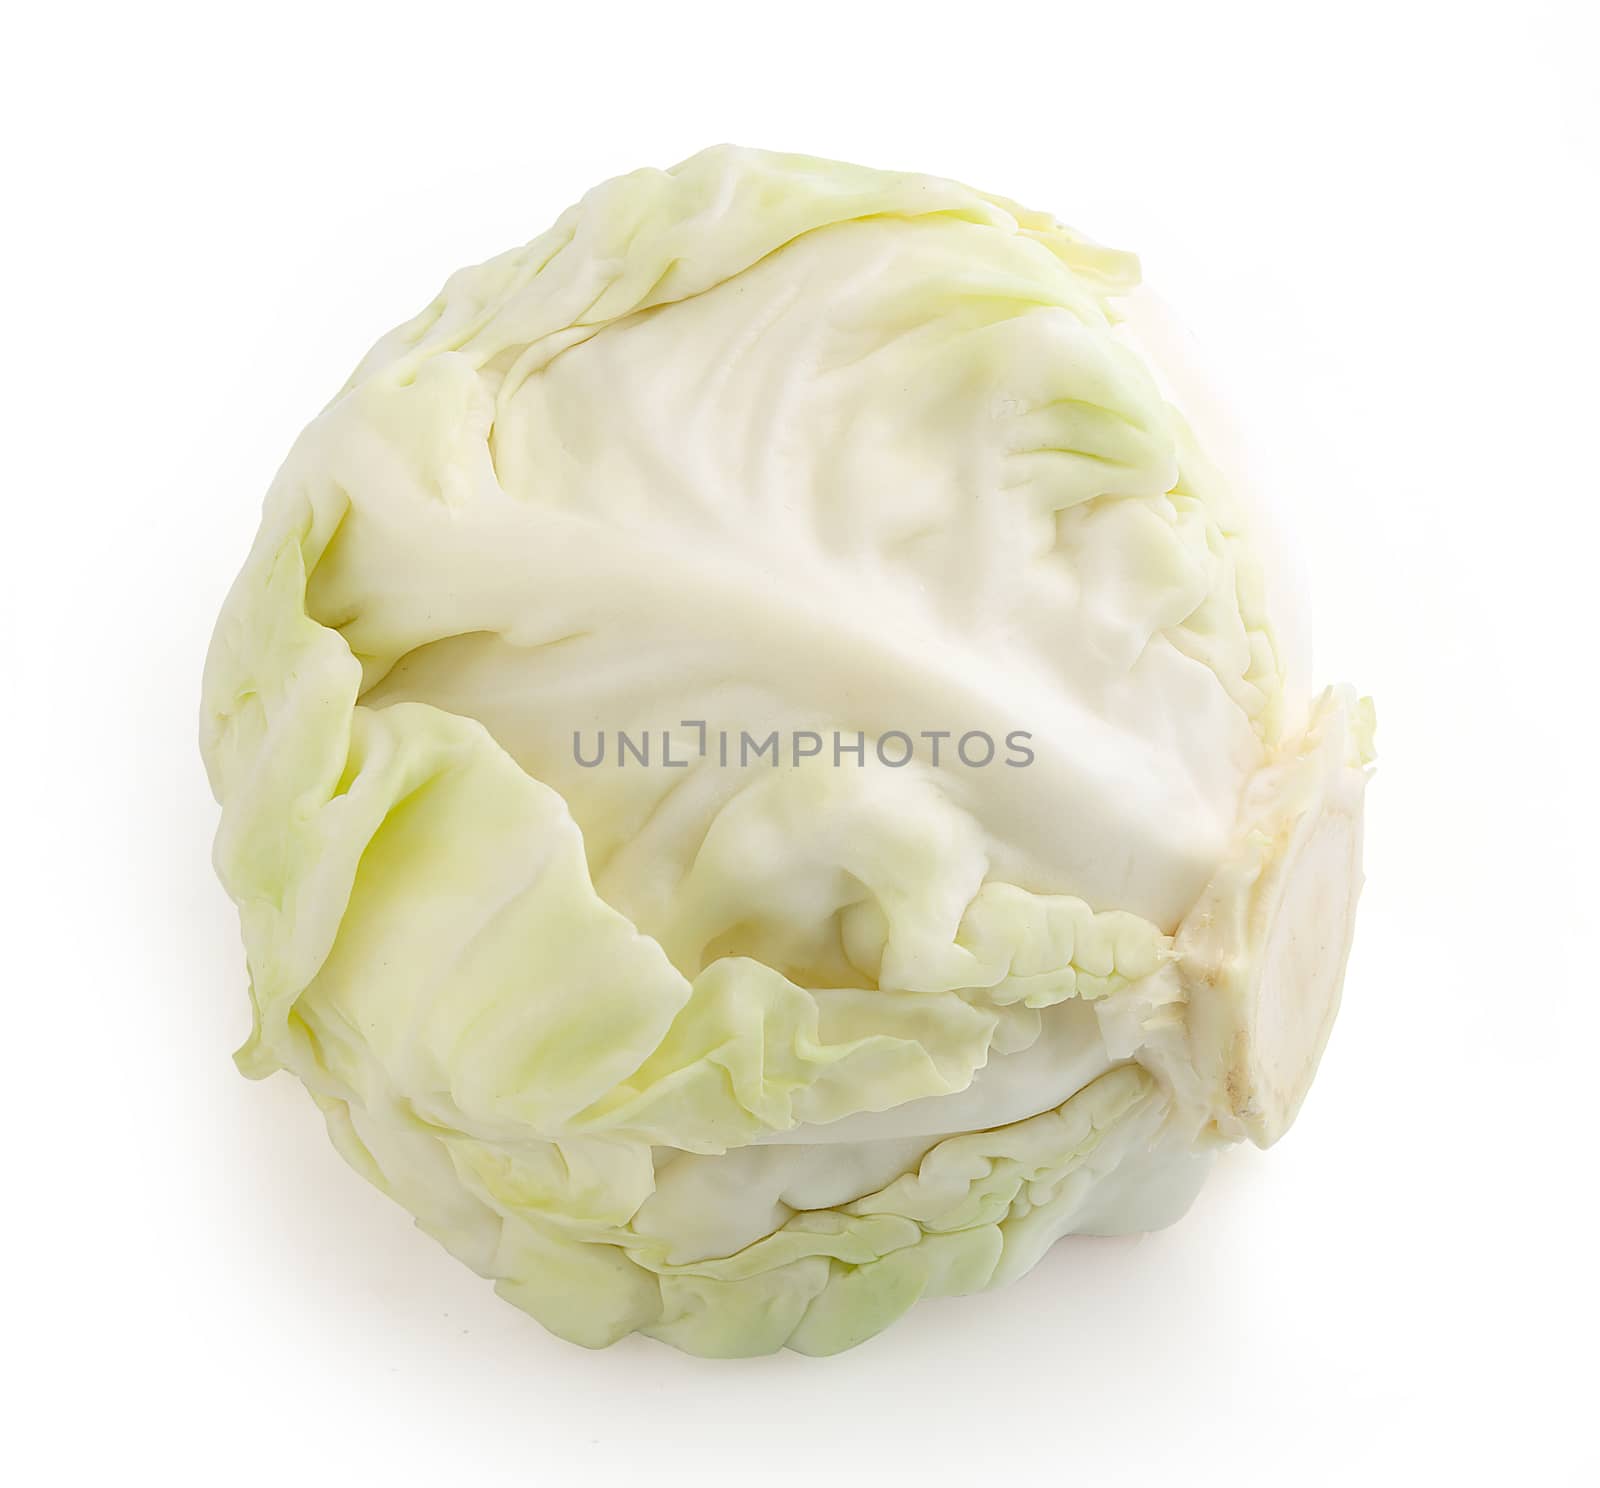 Isolated head of cabbage on the white background